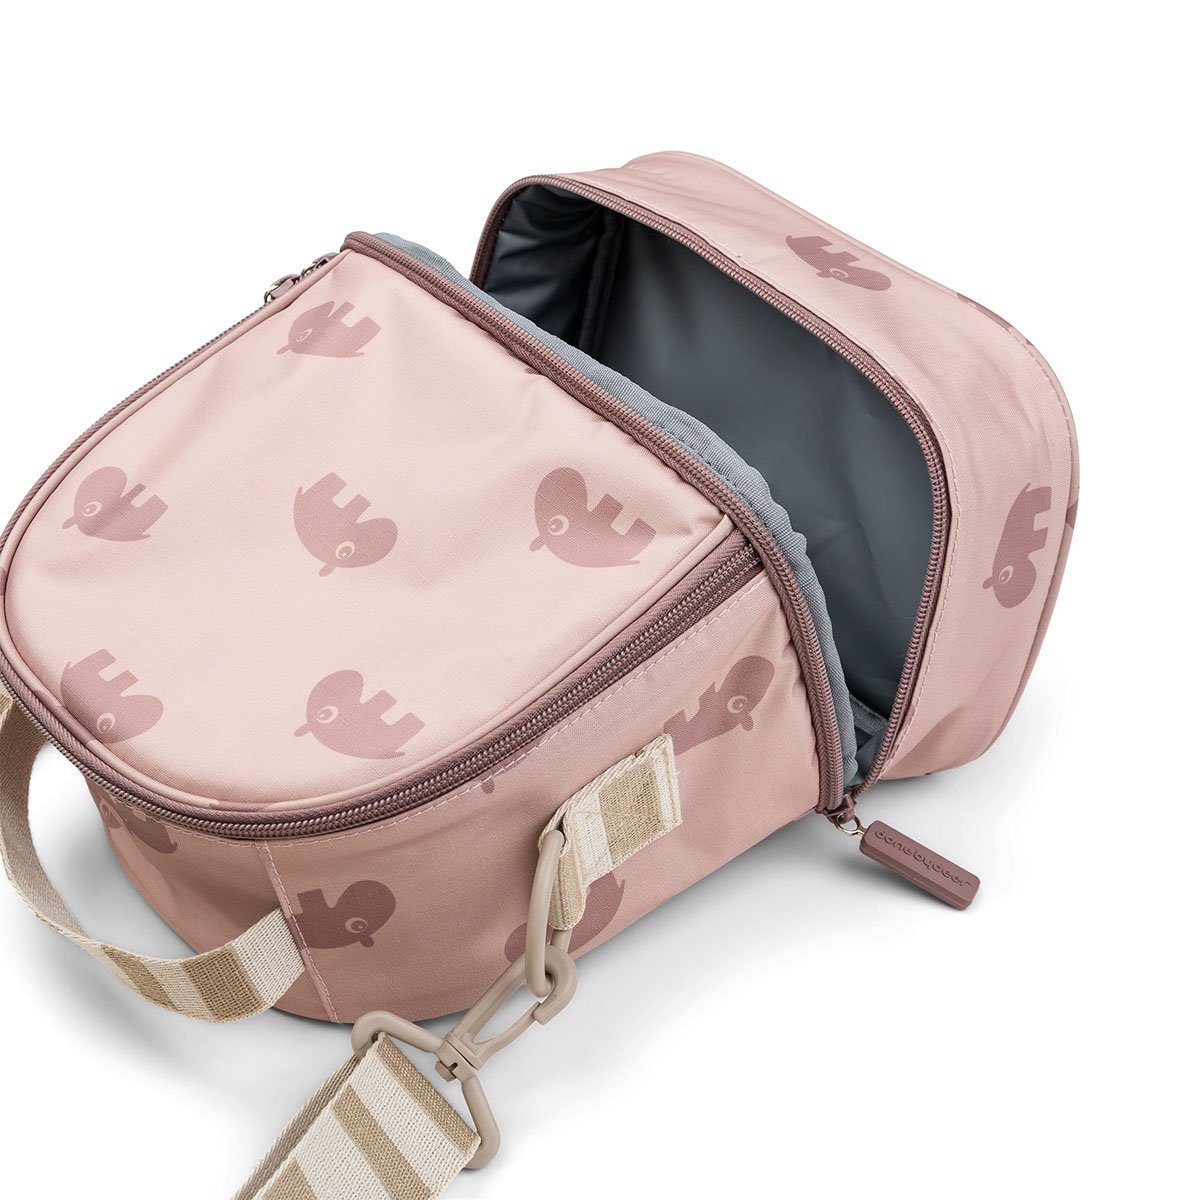 Done by Deer Lunchbox Isolierte Kinder-Lunchtasche Ozzo Rosa 14,5 cm x 22 x H24